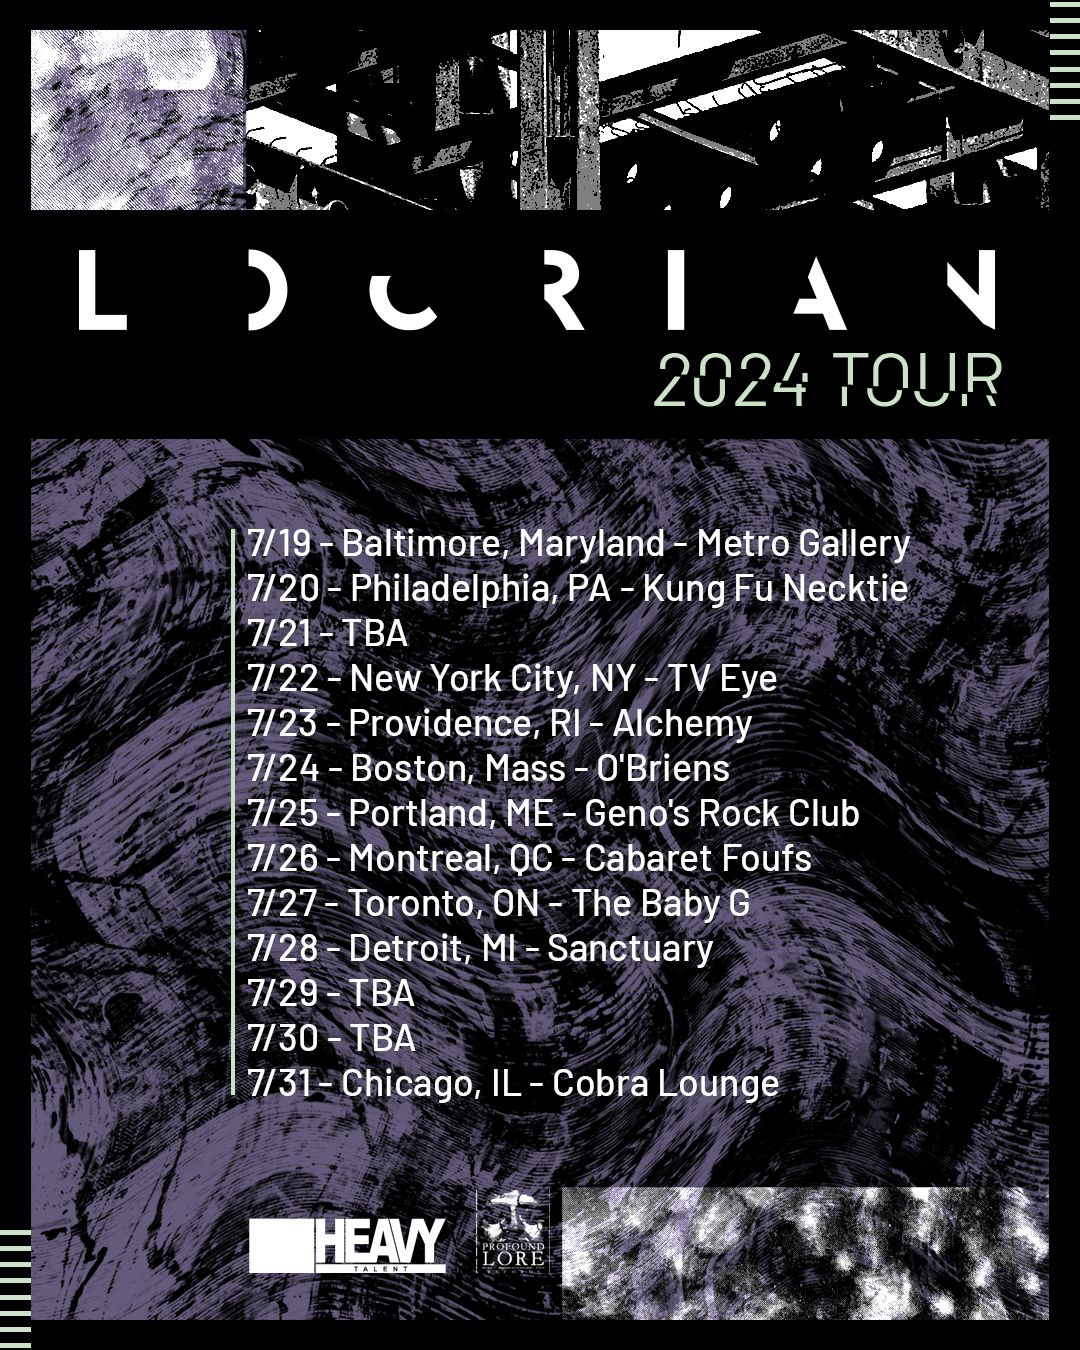 Locrian at Cobra Lounge w\/ Aseethe and Bottomed 